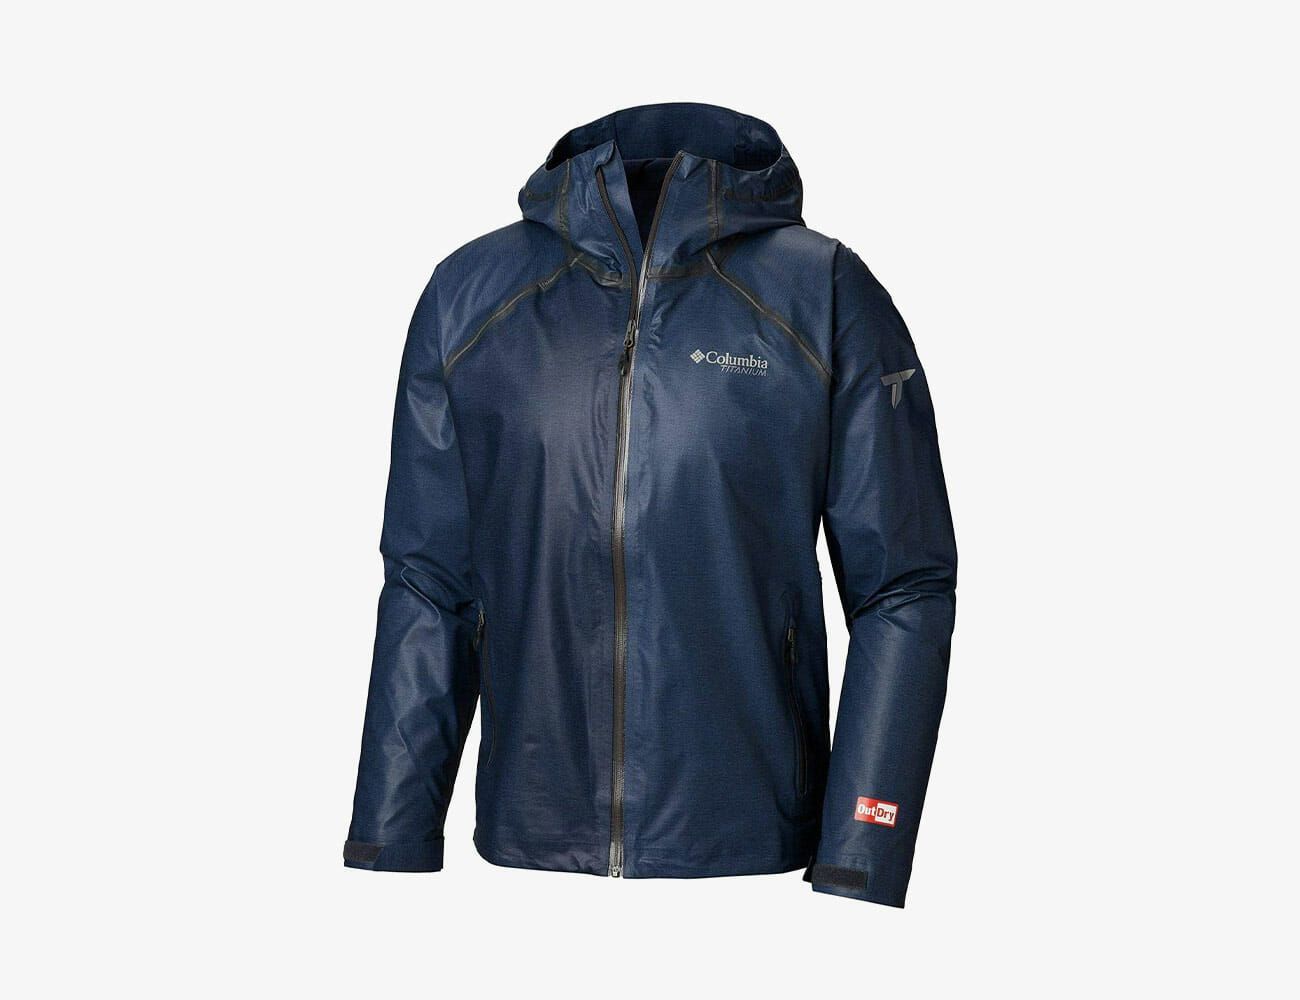 The 15 Best Rain Jackets To Keep You Dry | lupon.gov.ph